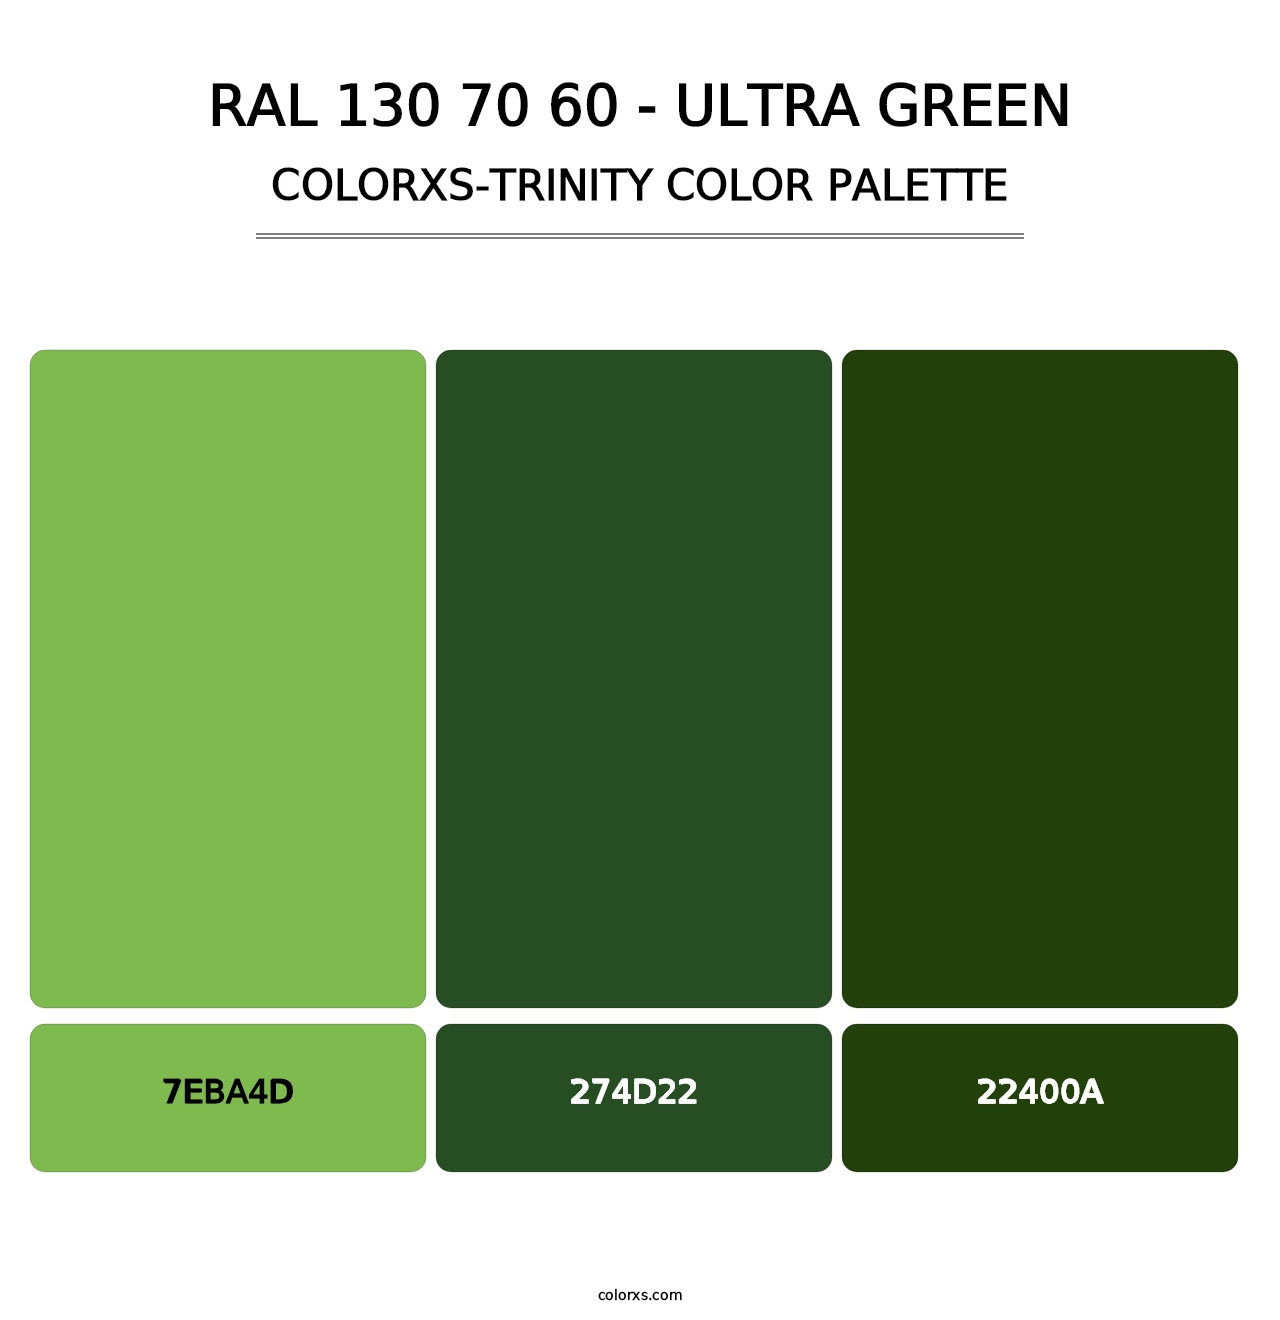 RAL 130 70 60 - Ultra Green - Colorxs Trinity Palette